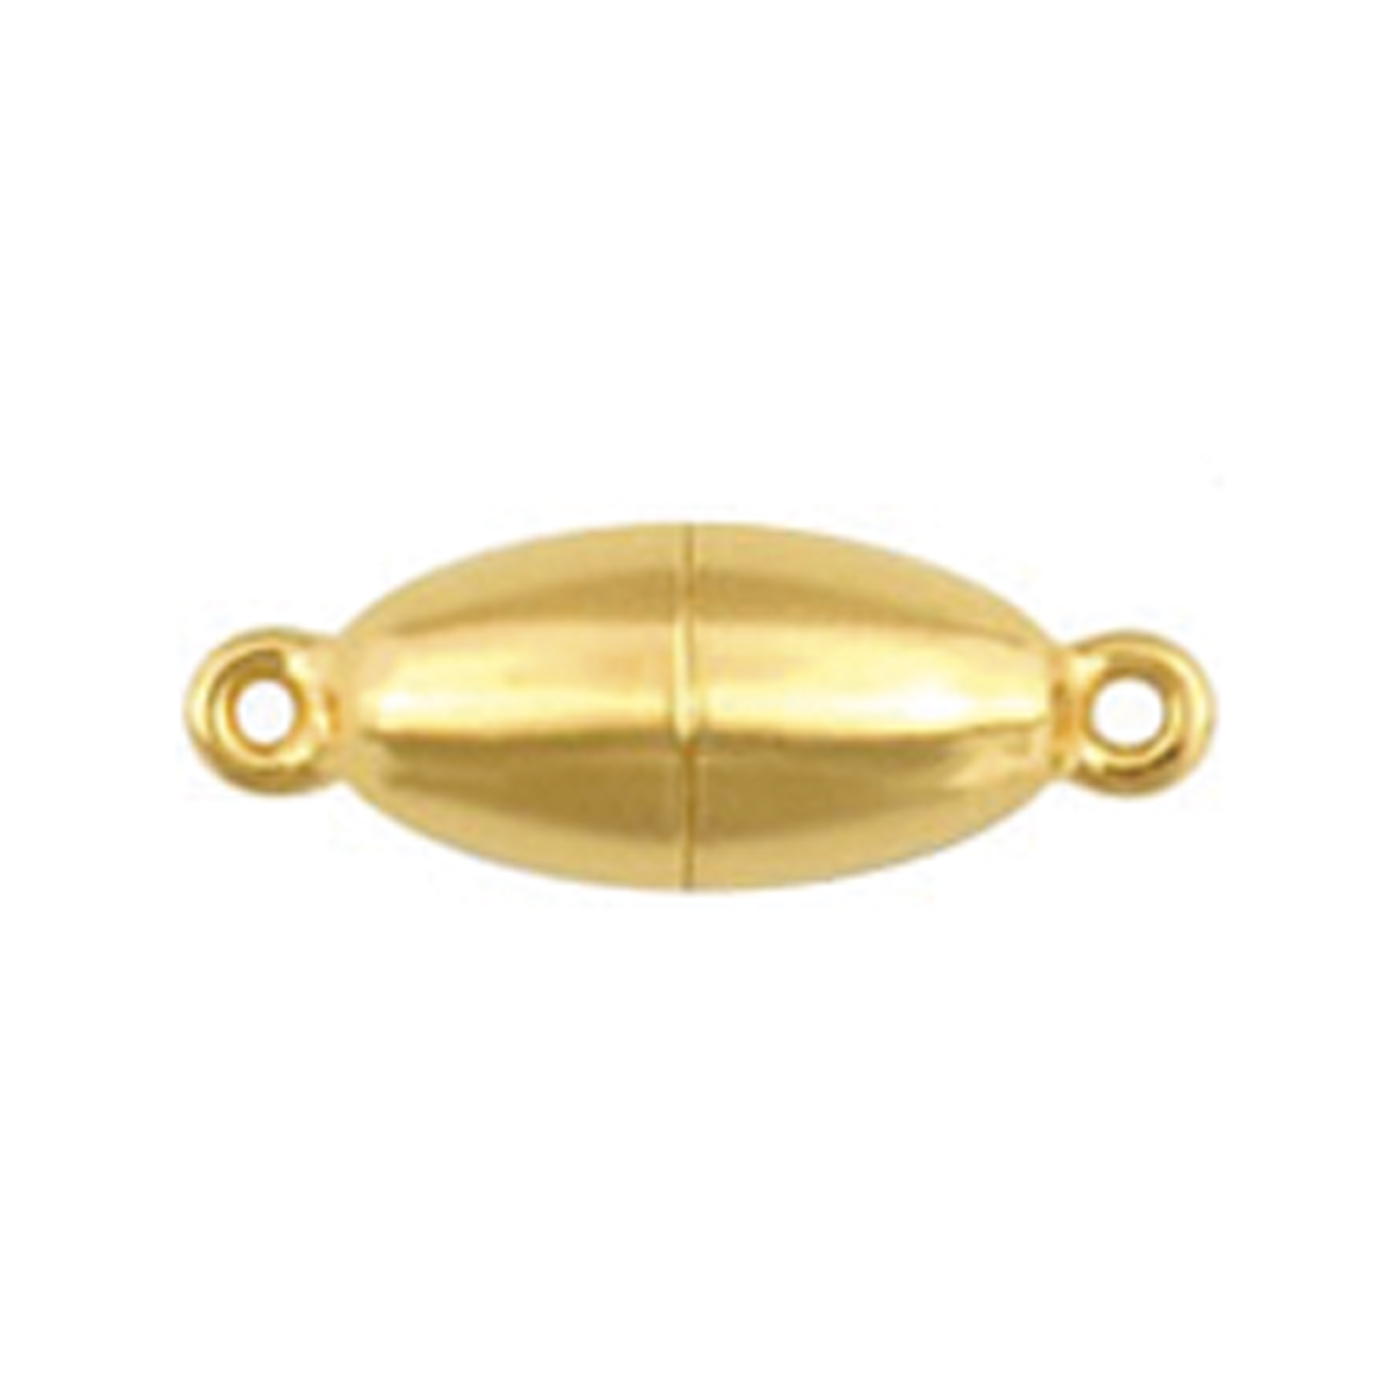 Magnetic Clasp, Olive, 925Ag Gold-Plated Polished, ø 6.5 mm - 1 piece